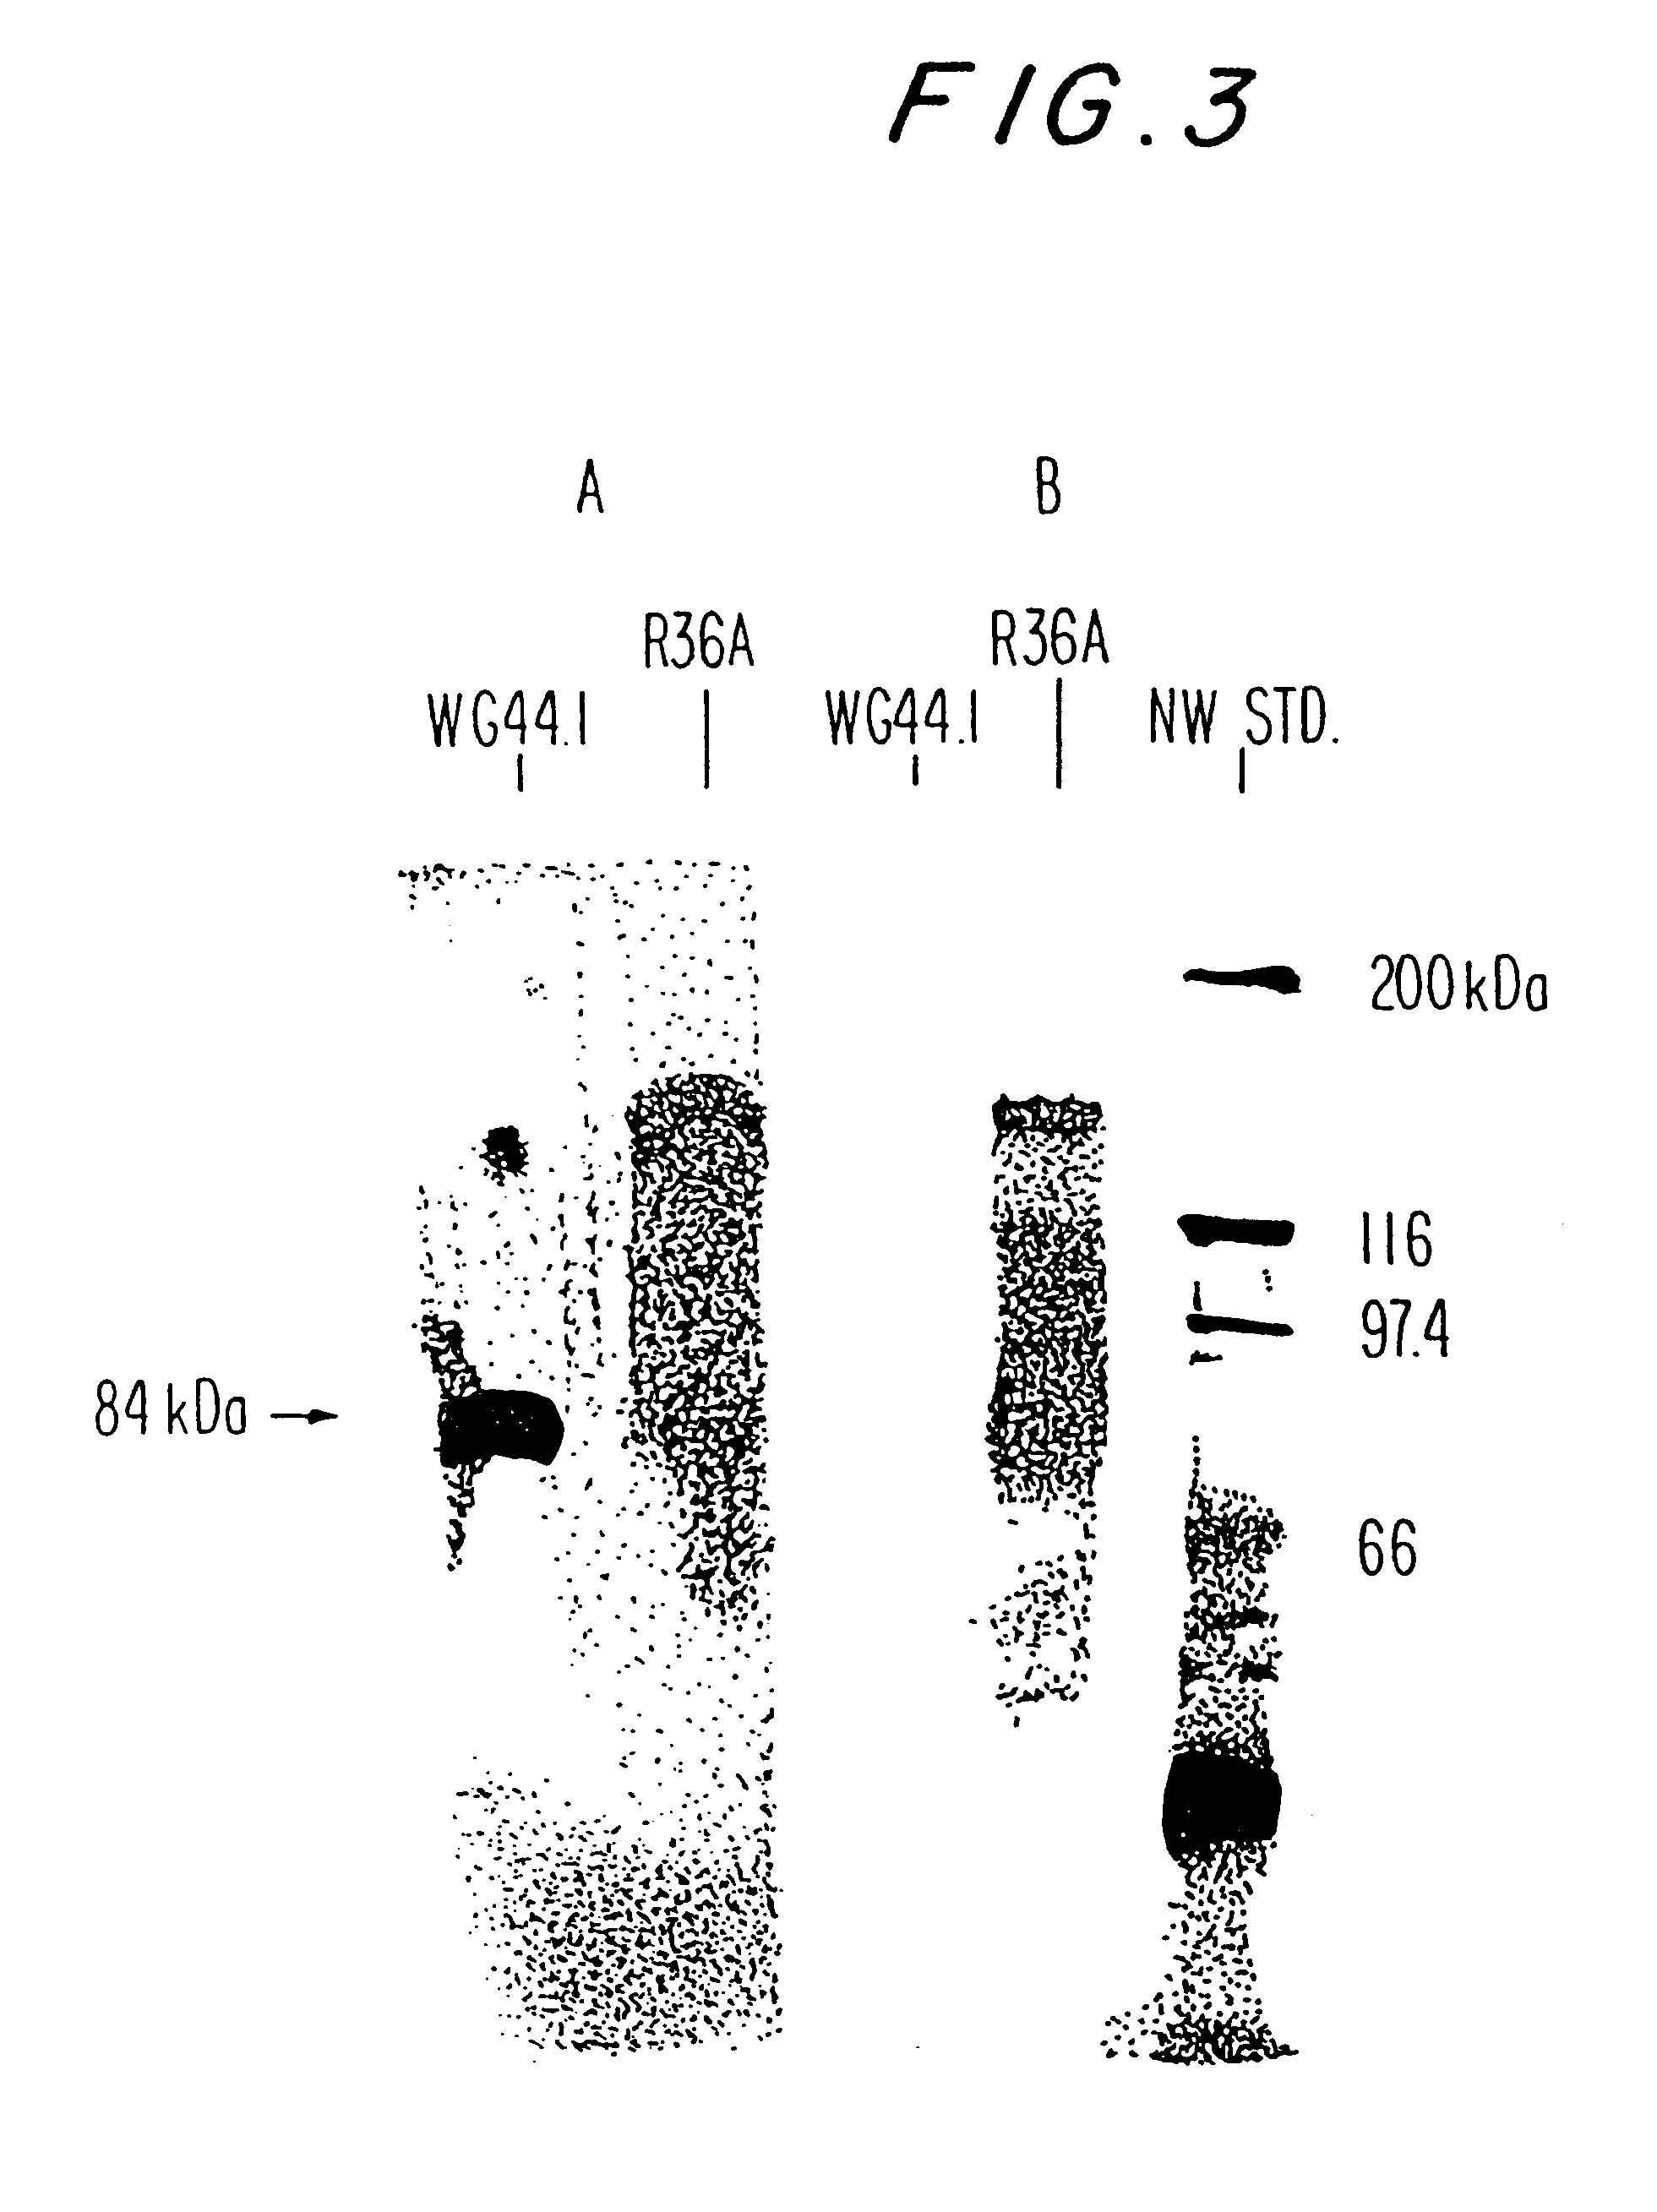 Pneumococcal surface proteins and uses thereof